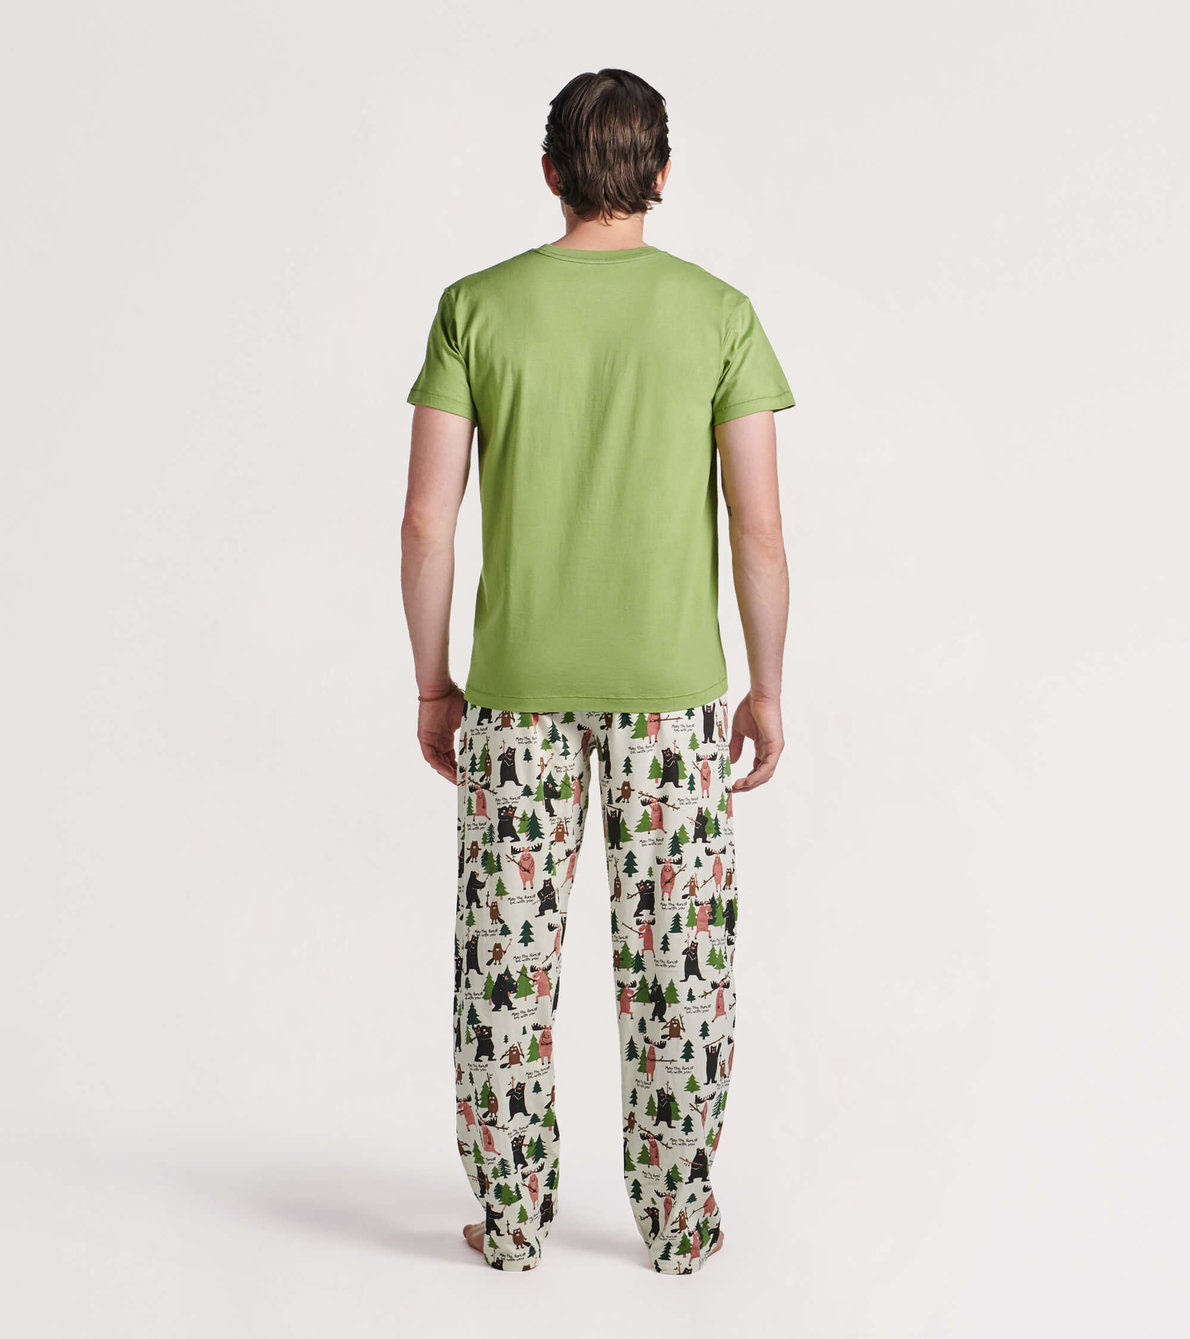 View larger image of May The Forest Be With You Men's Tee and Pants Pajama Separates